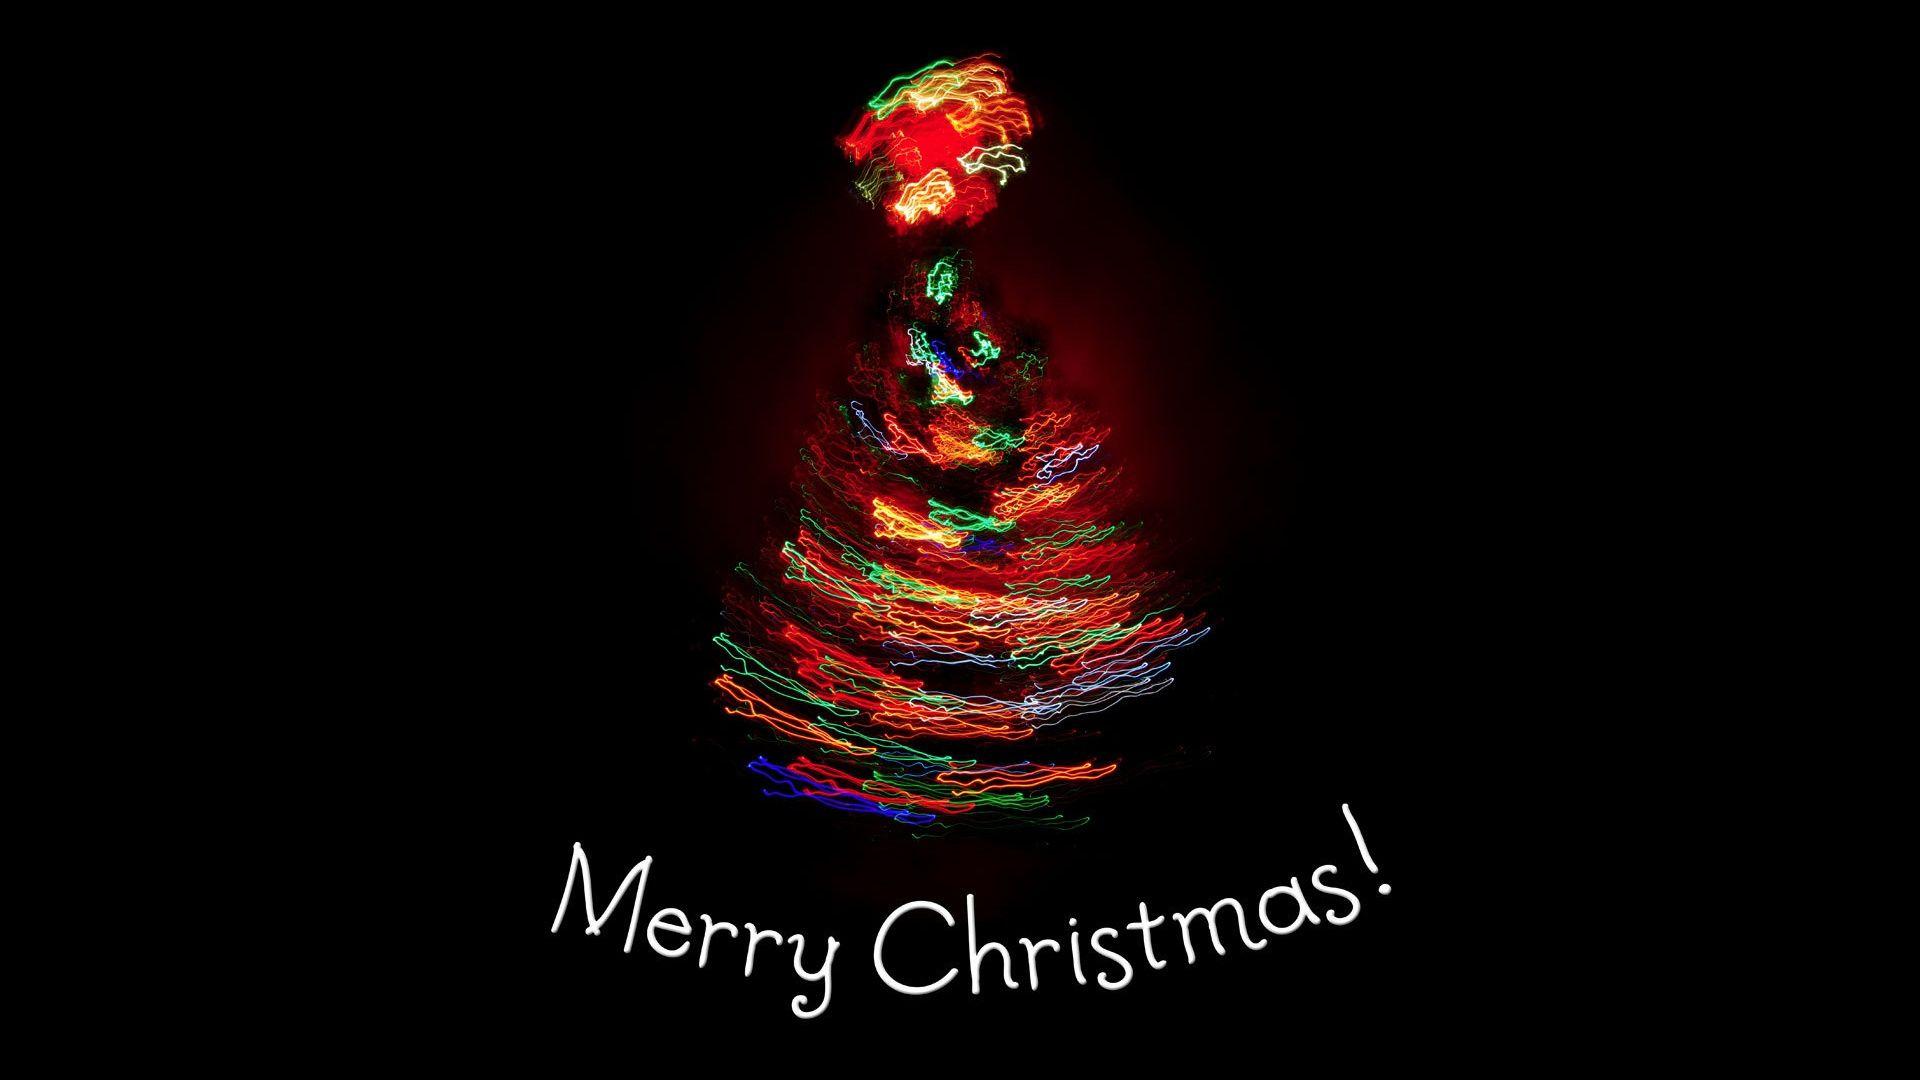 Merry Christmas HD Wallpapers - Top Free Merry Christmas HD Backgrounds